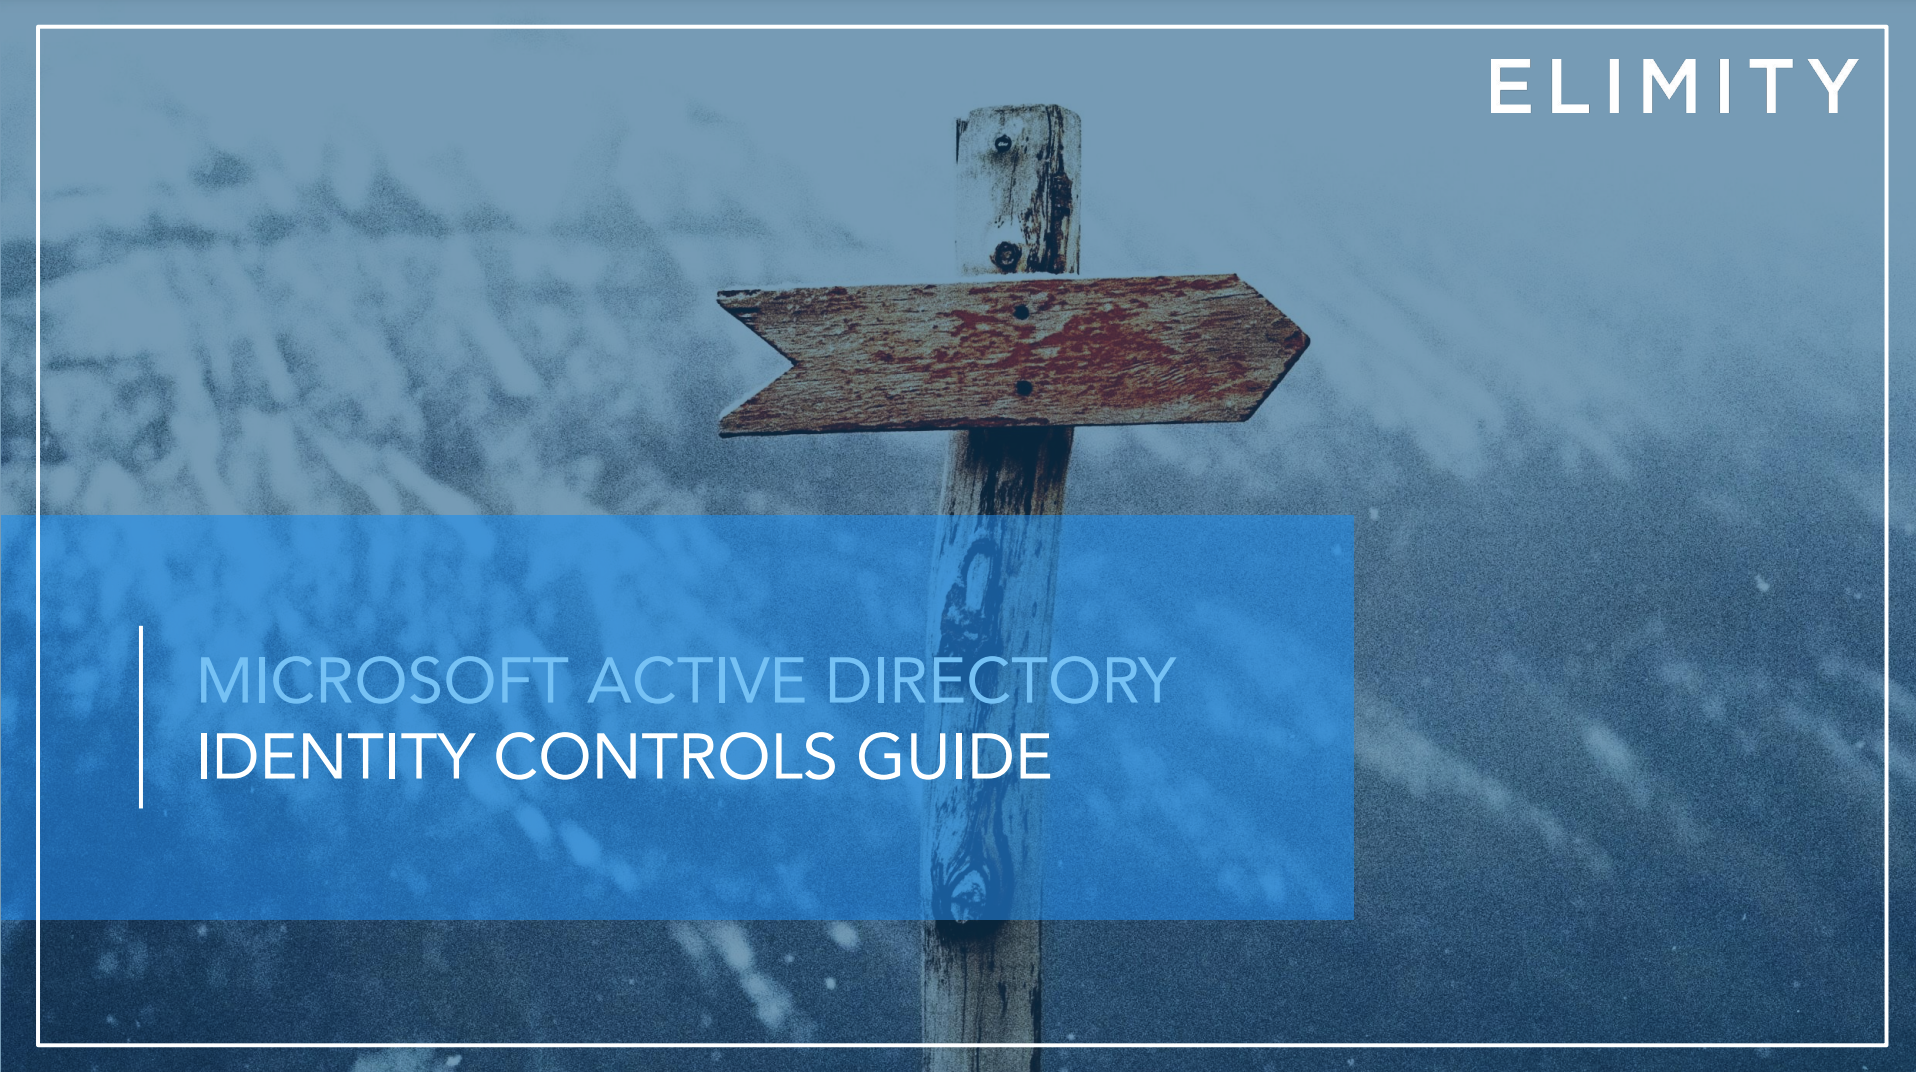 MICROSOFT ACTIVE DIRECTORY IDENTITY CONTROLS GUIDE